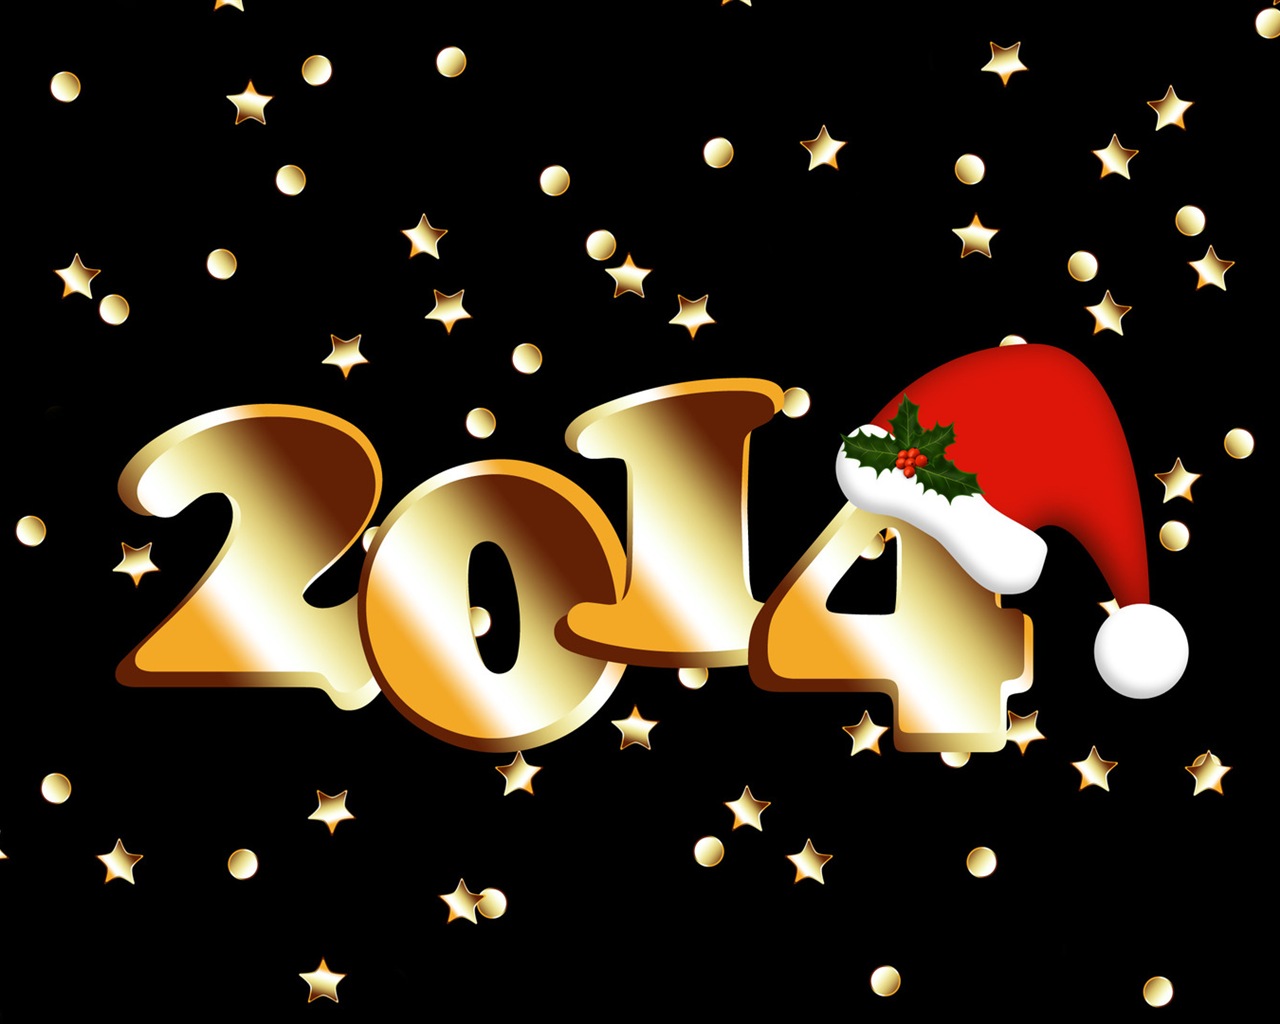 2014 New Year Theme HD Wallpapers (1) #15 - 1280x1024